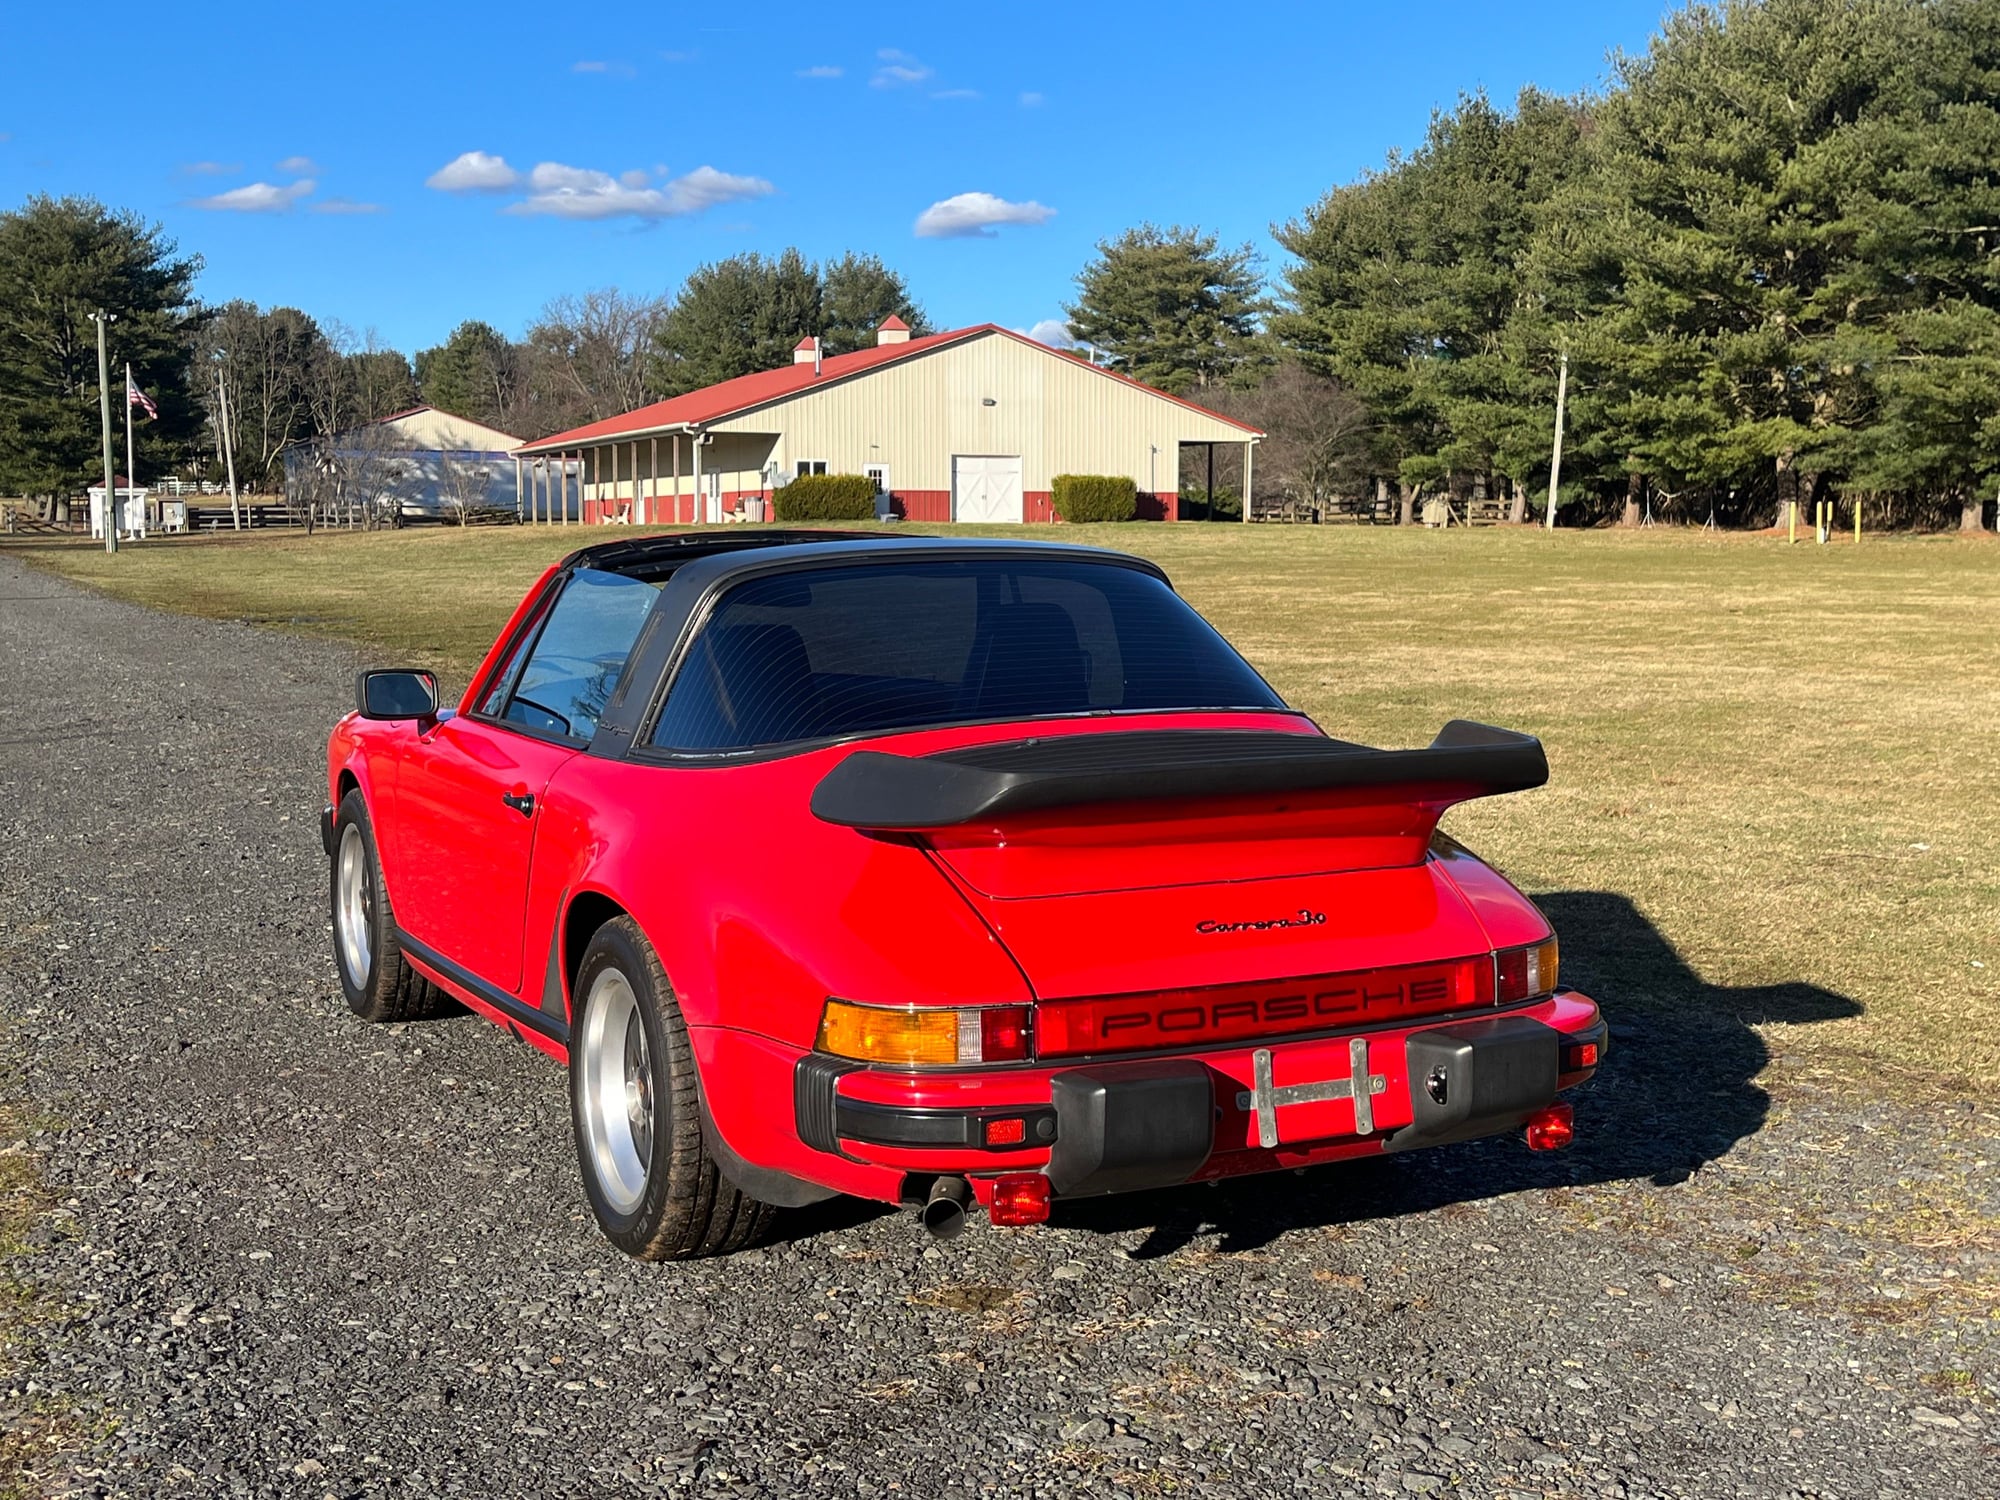 1980 Porsche 911 - Well Maintained 1980 Targa ready for new owner - Used - Colts Neck, NJ 7722, United States